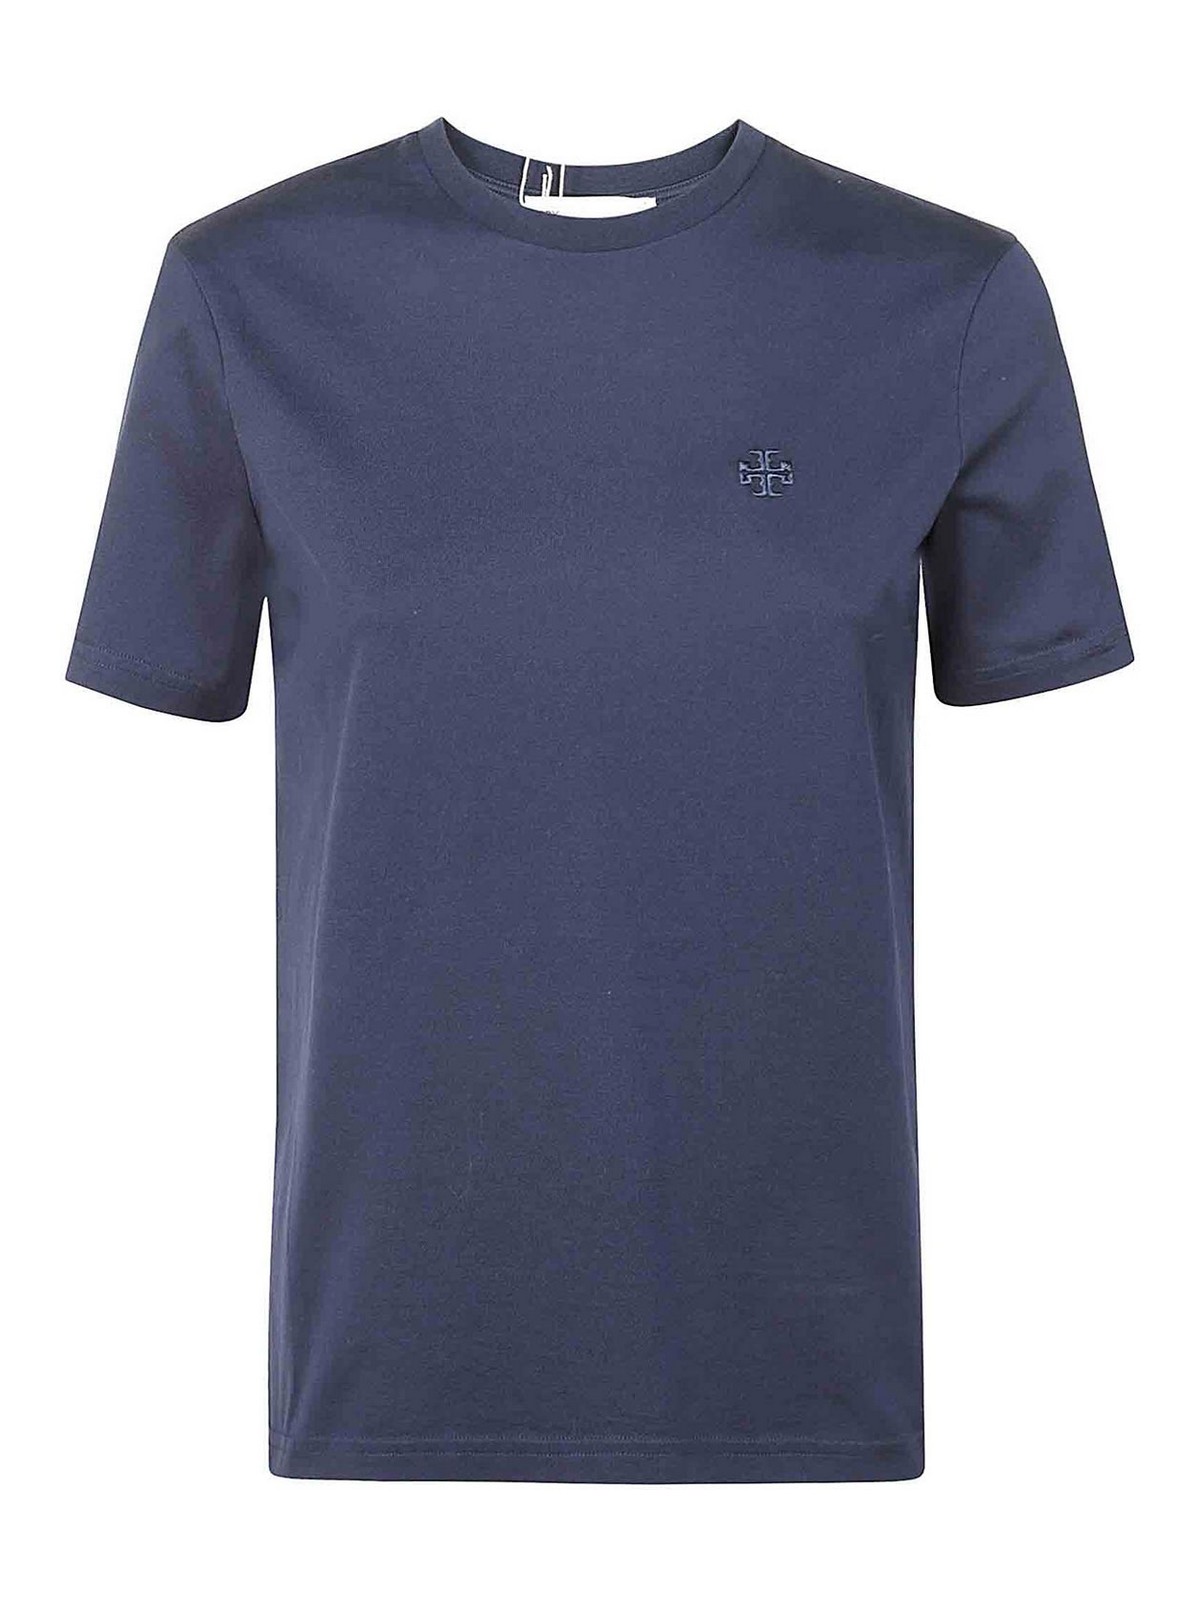 Tory Burch Jersey Tshirt Logo On Chest Crew Neck In Blue